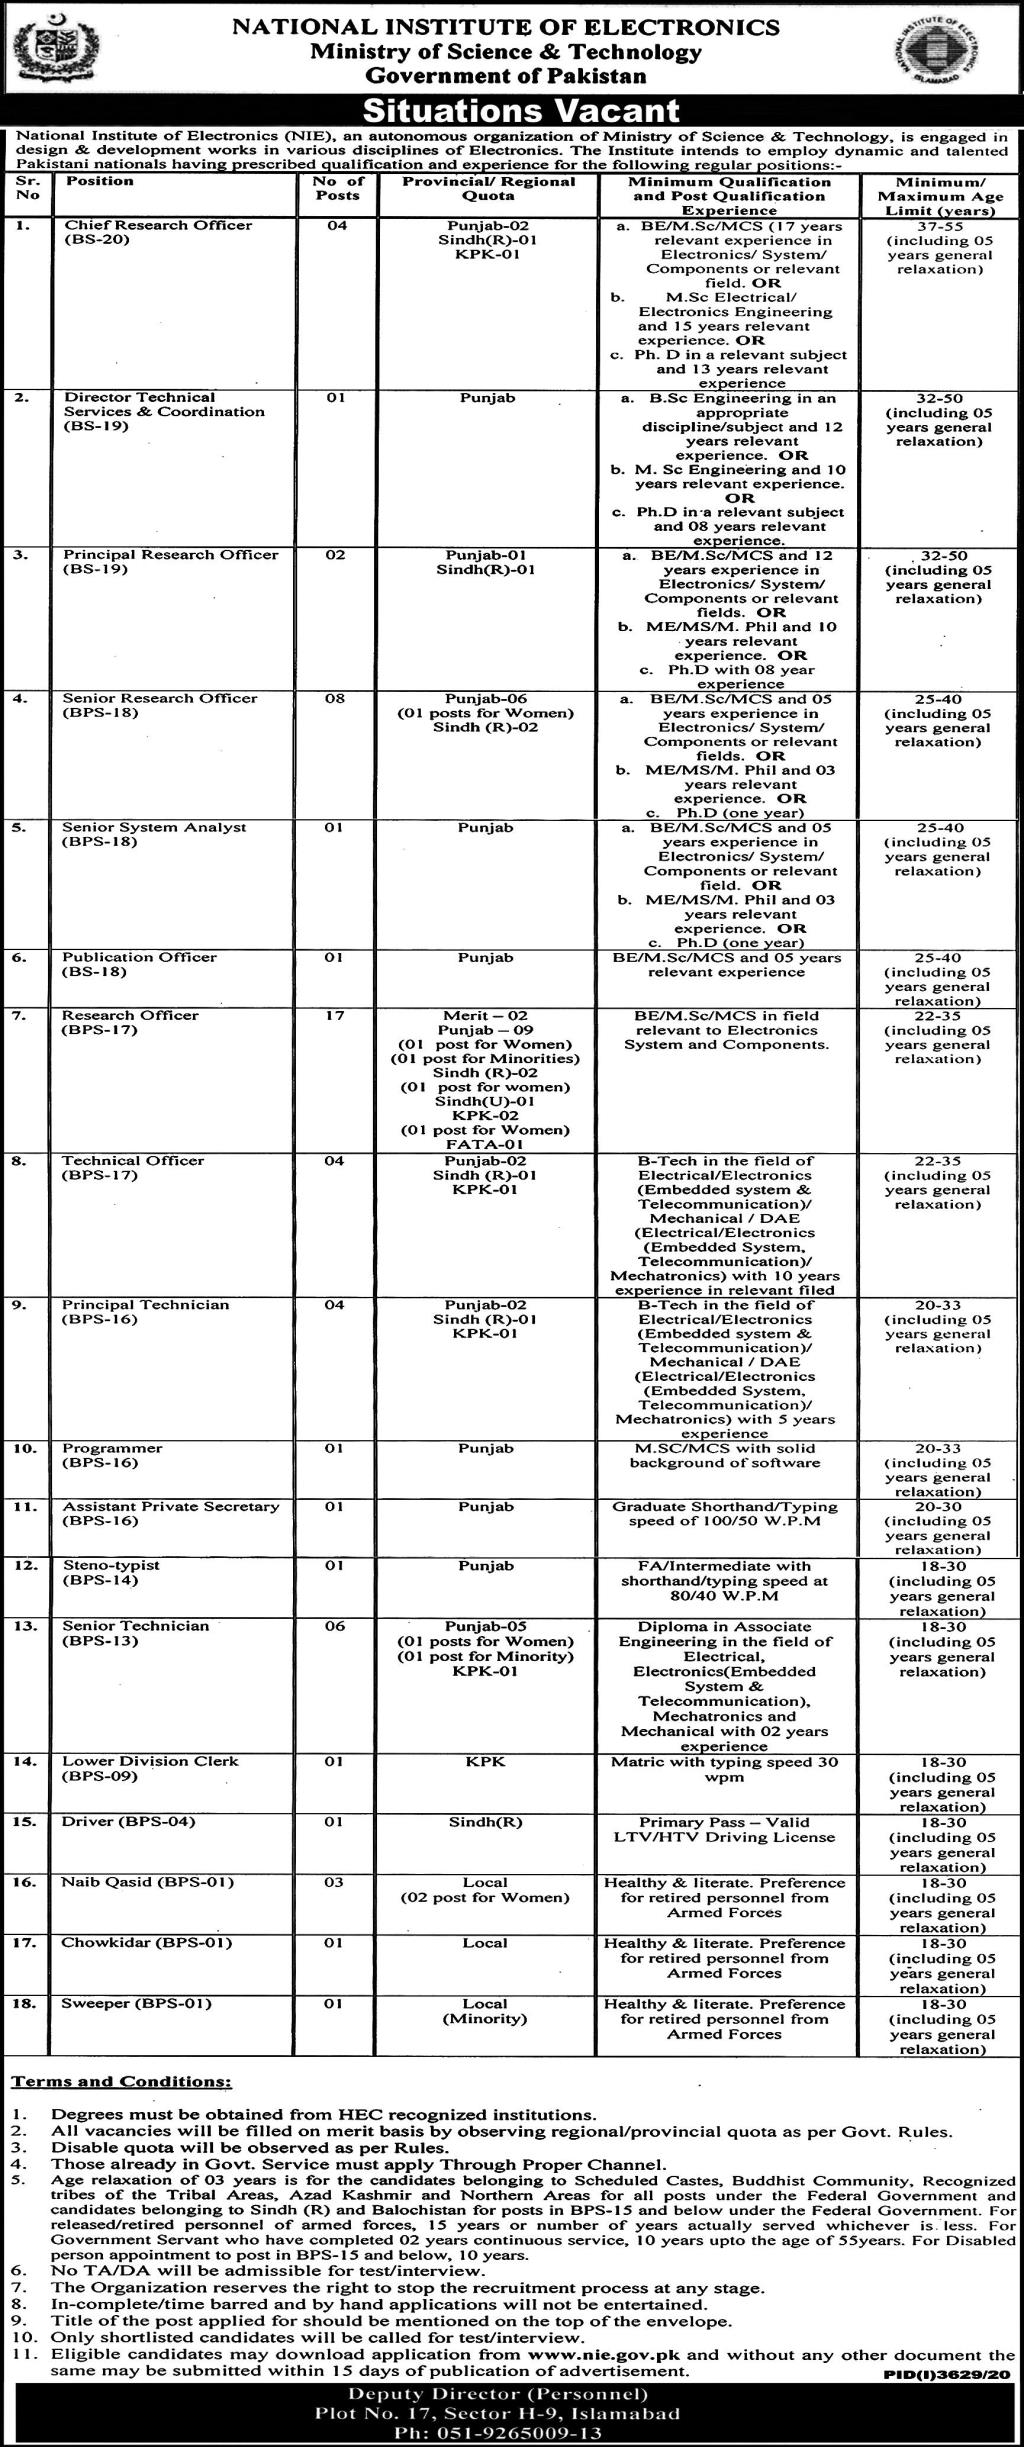 National Institute of Electronics Jobs 2021